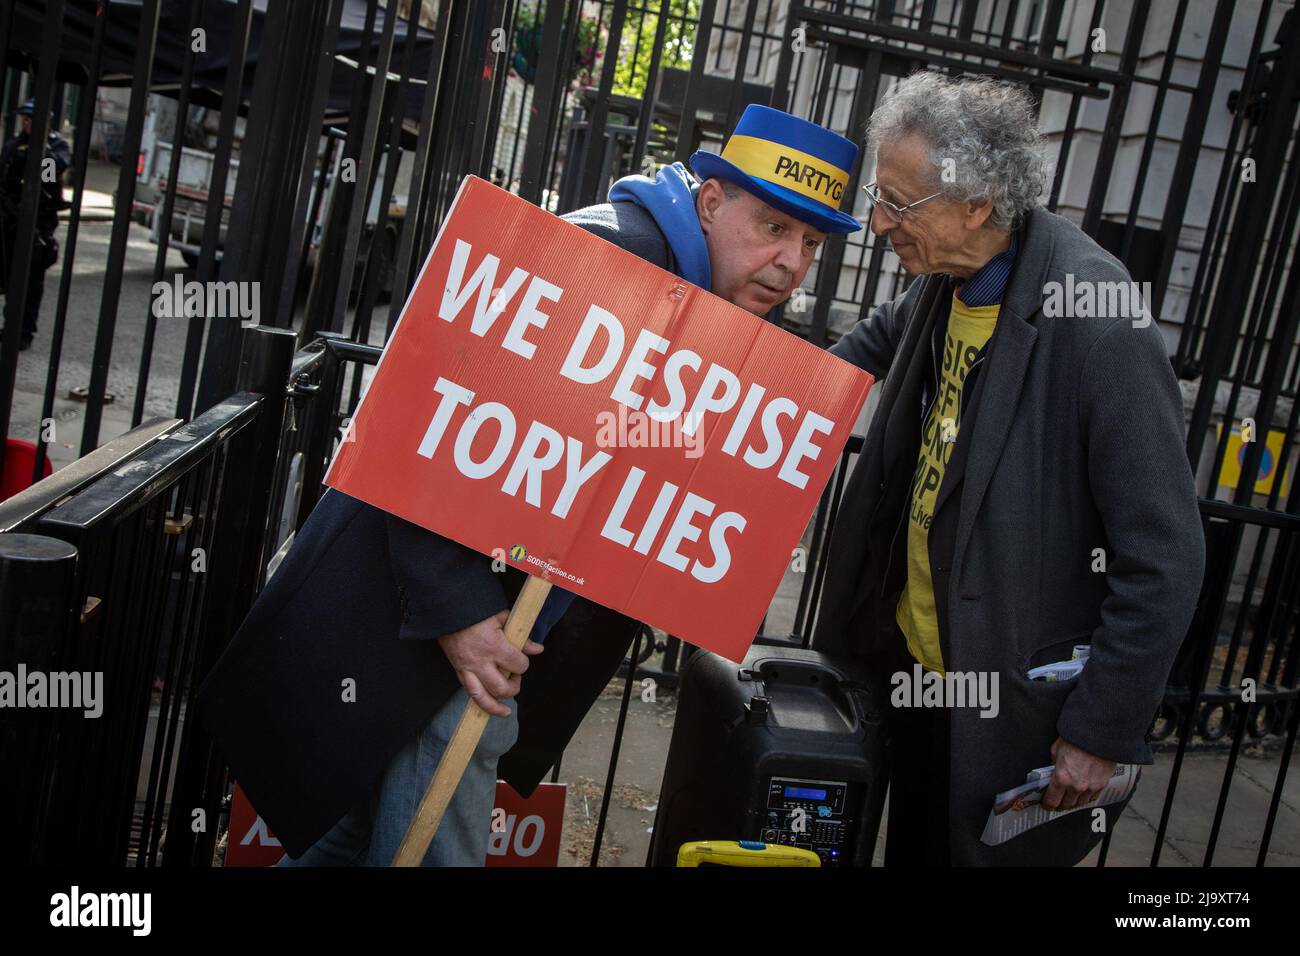 London, UK. 25 May 2022. Steve Bray, leader of the 'Stand of Defiance European Movement' (SODEM) talks to Piers Corbyn outside Downing Street, holding up a sign stating 'We despise Tory lies' on the day, the Sue Gray report with details about parties at Downing Street during lockdown has finally been revealed. Credit: Kiki Streitberger/Alamy Live News Stock Photo